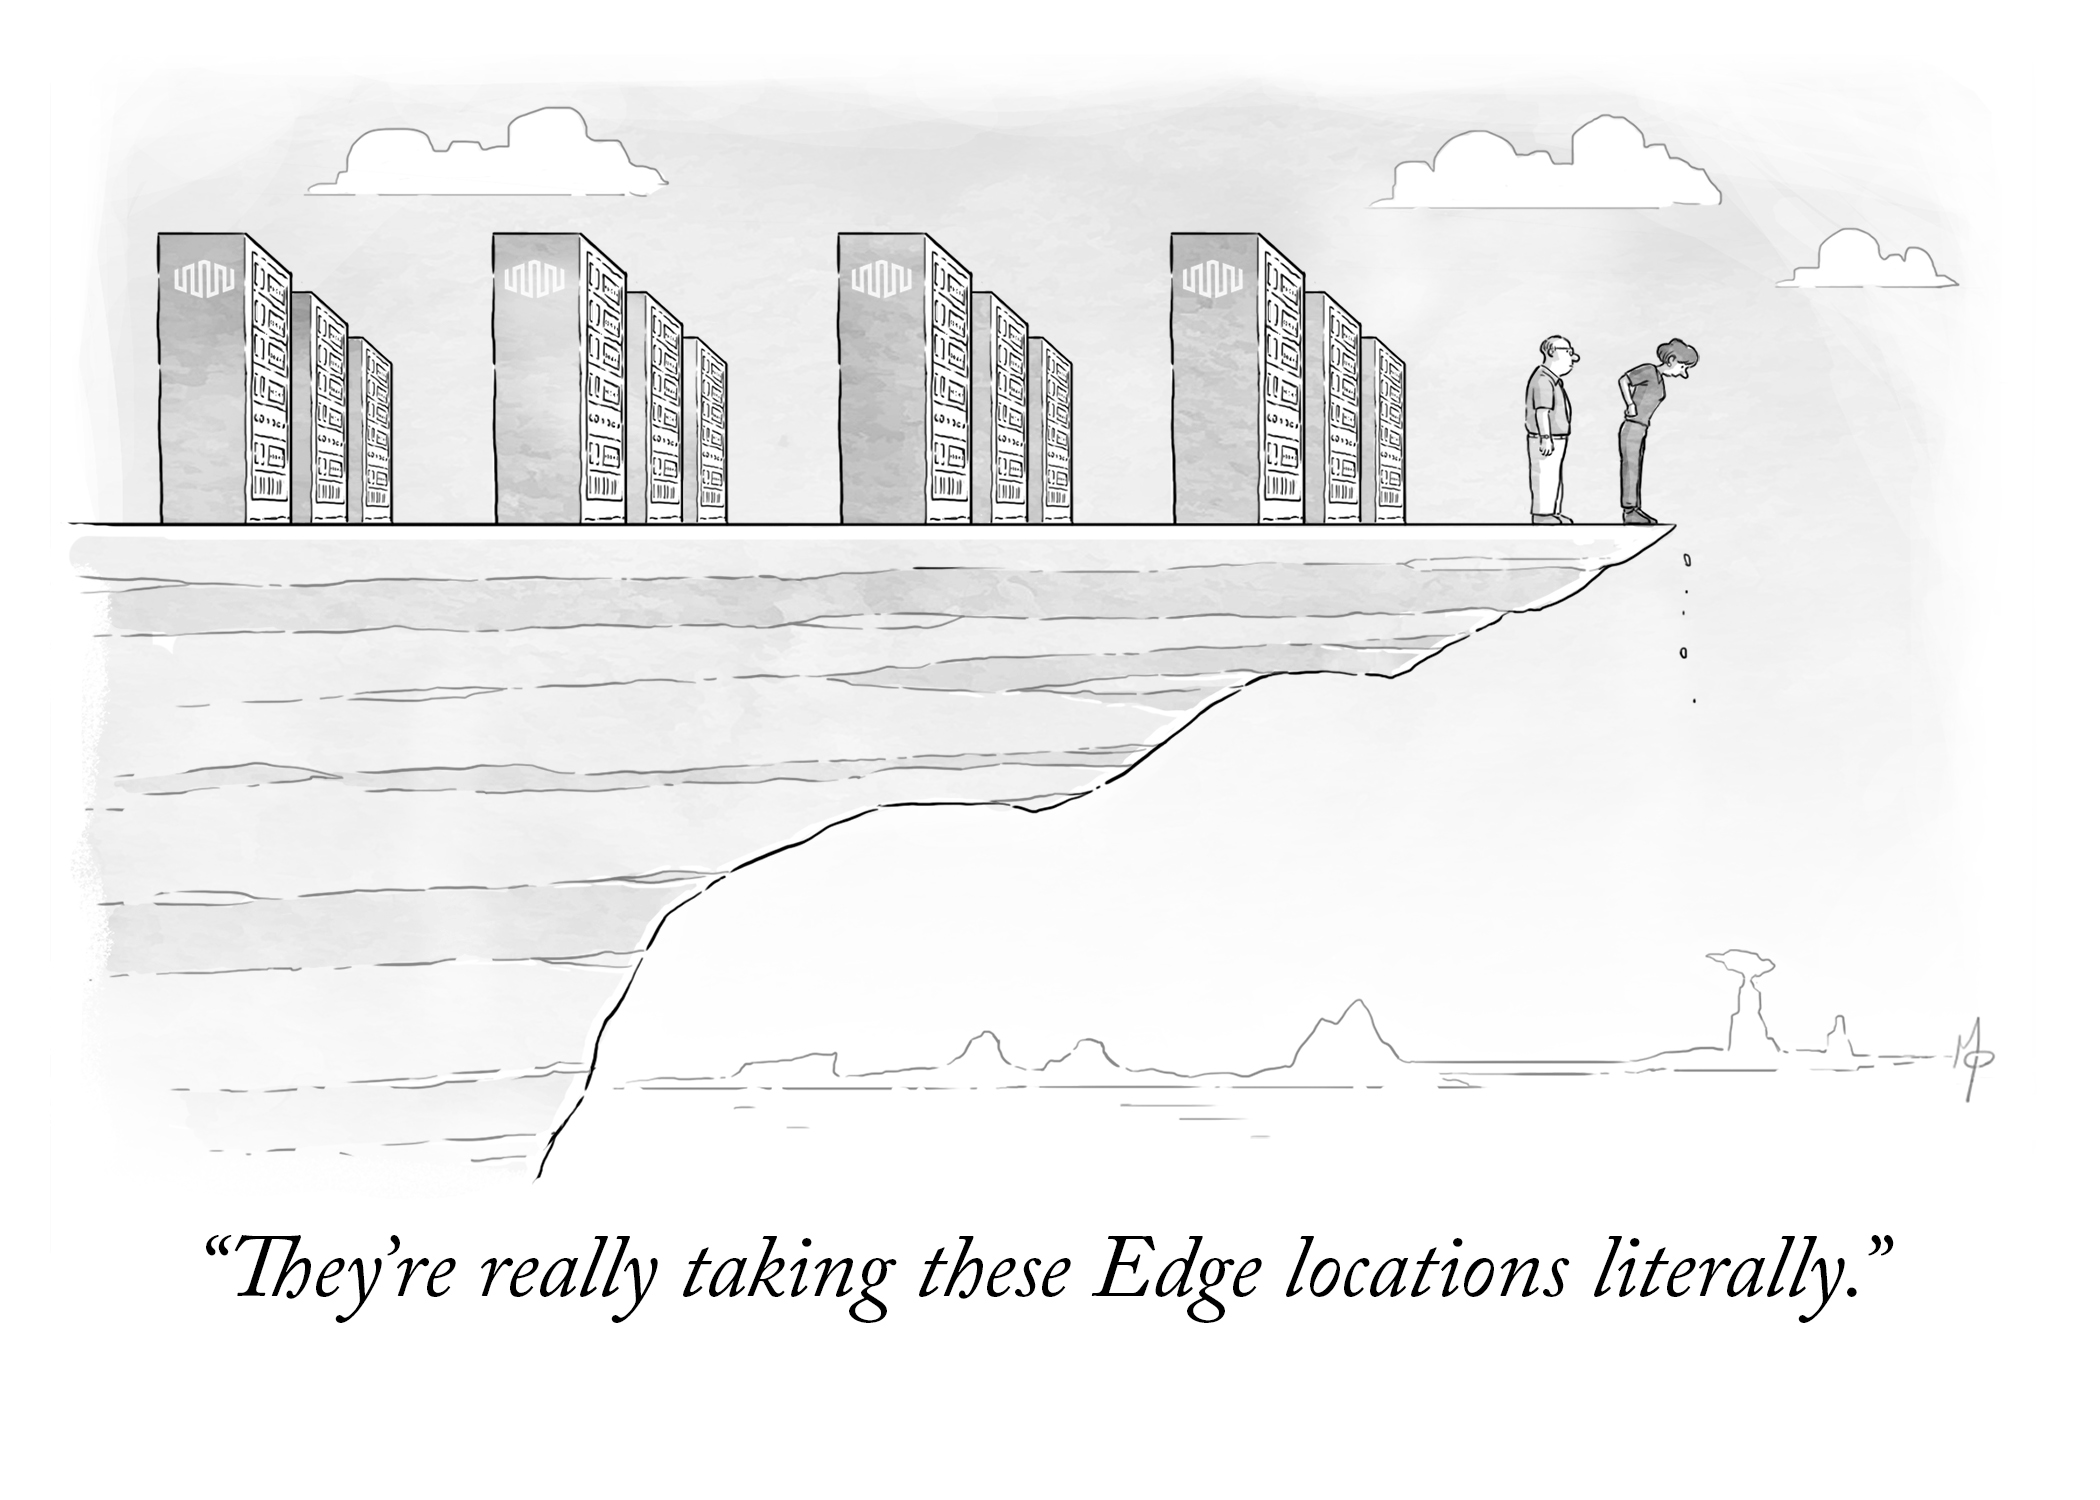 New Yorker style illustration. Man is looking over the edge of a cliff. Behind him is another man and many server racks. The caption reads: They're really taking these Edge Locations literally 